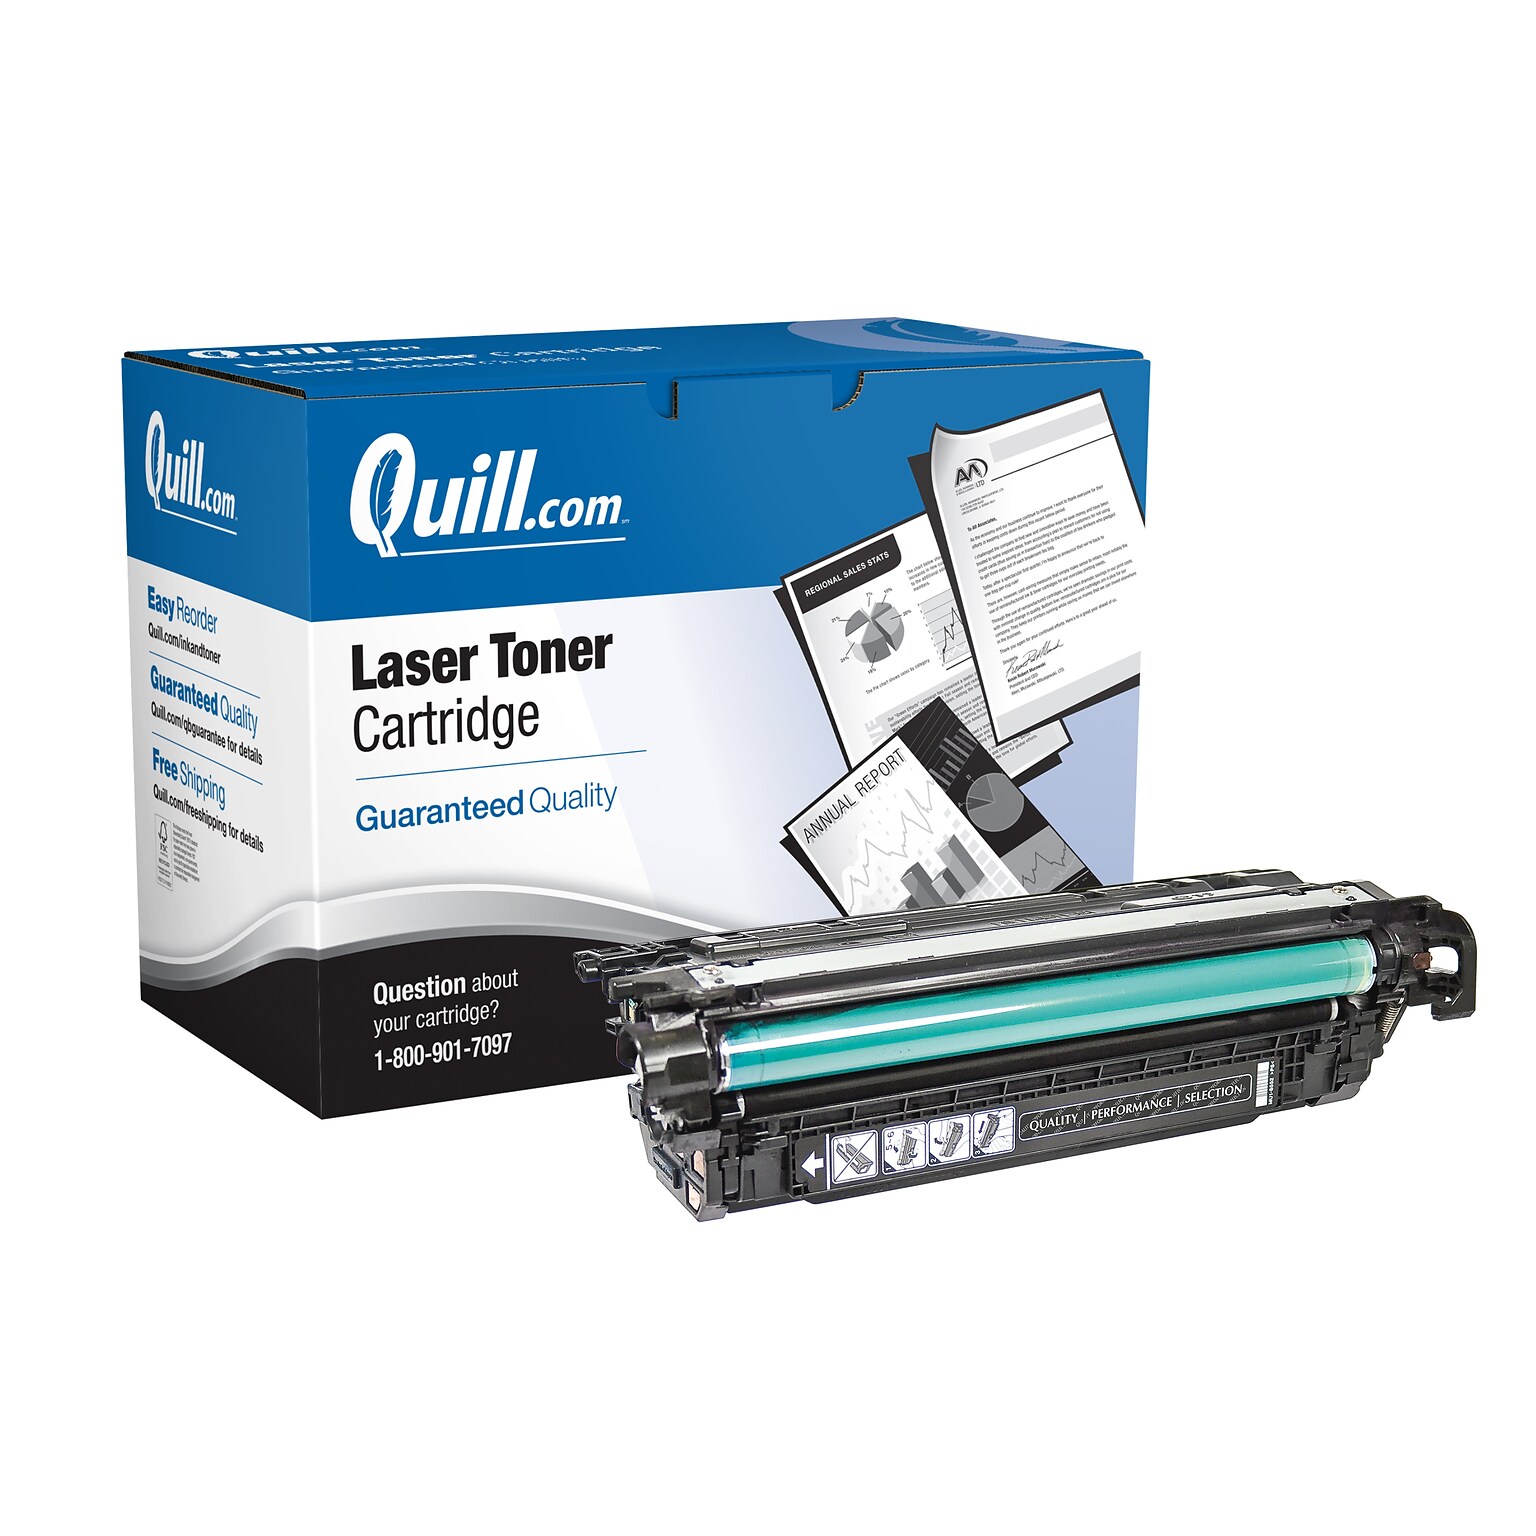 Quill Brand® Remanufactured Black High Yield Toner Cartridge Replacement for HP 649A (CE260X) (Lifetime Warranty)